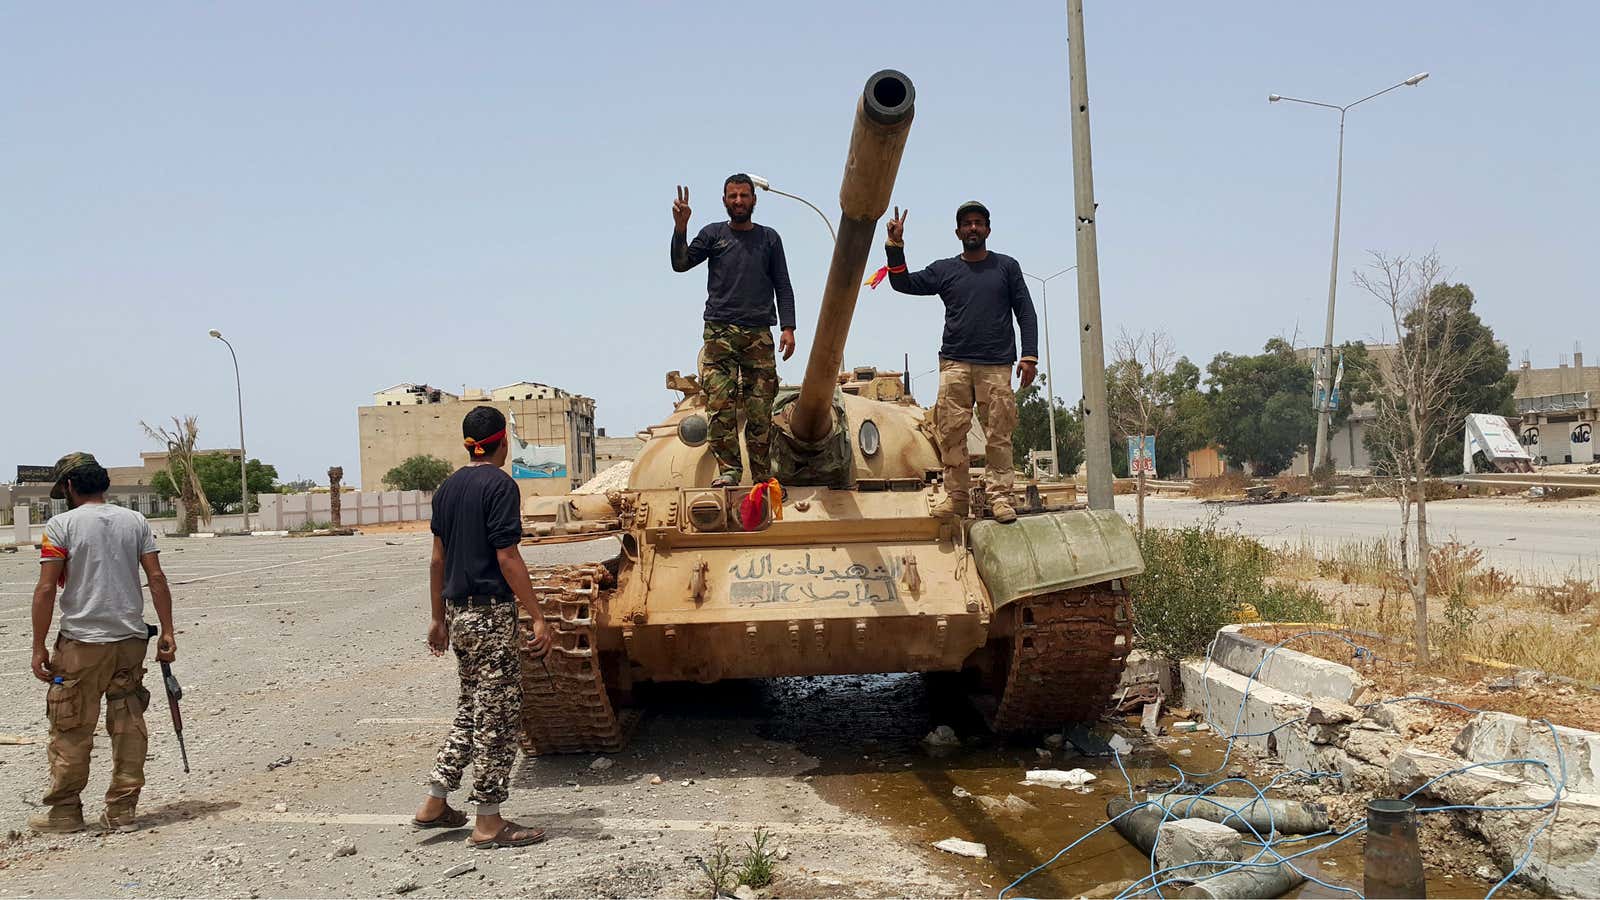 Pro-government forces fighting ISIL in Libya.